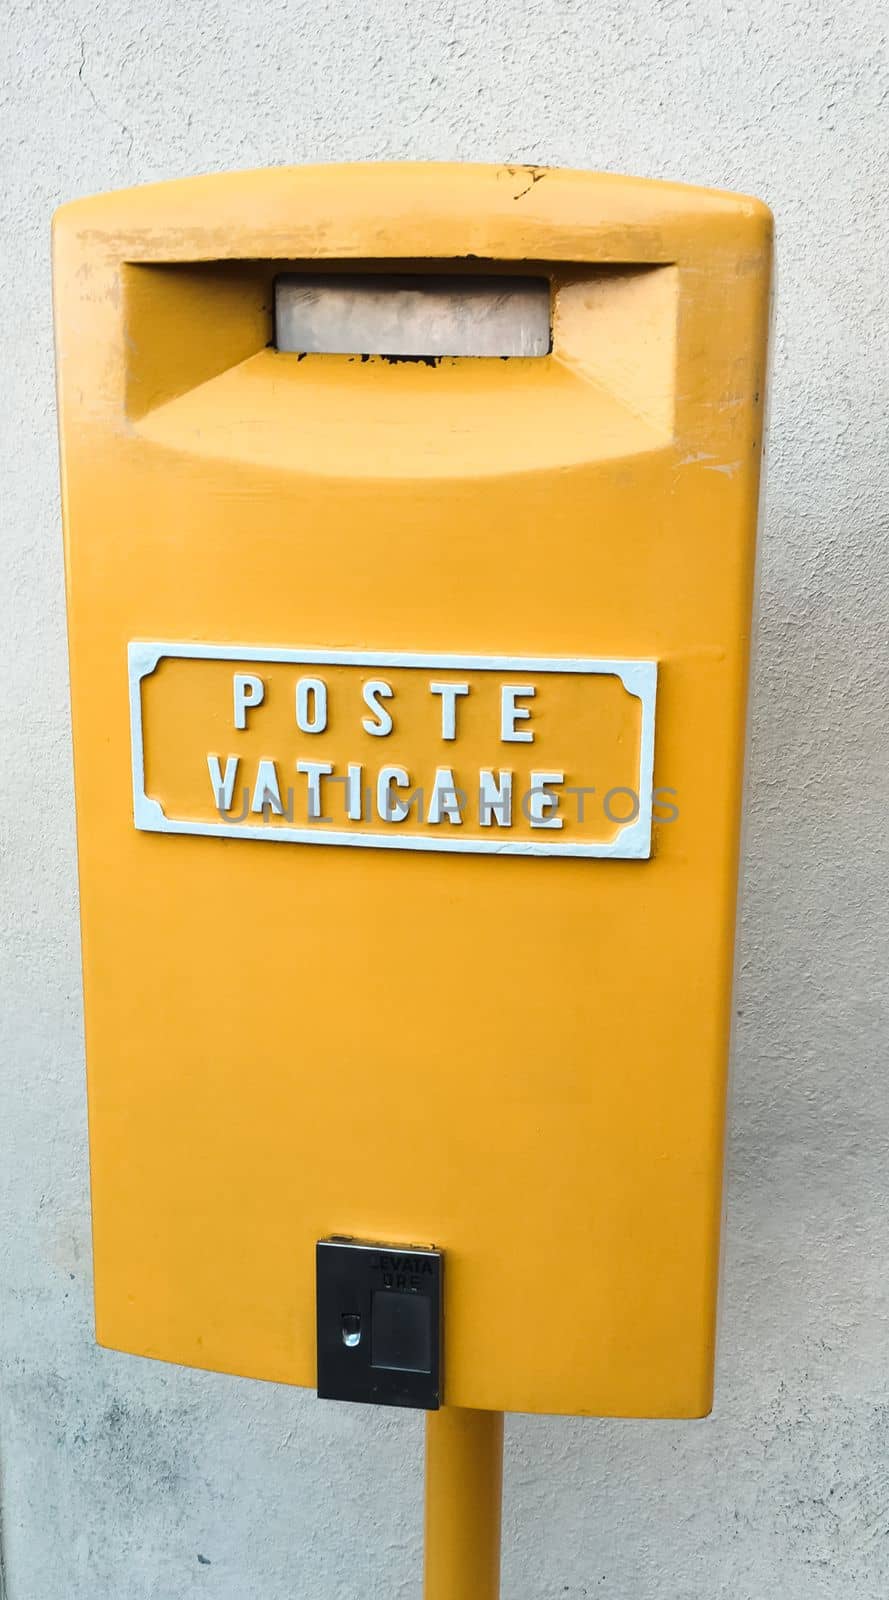 Post box in vatican city rome italy. High quality photo